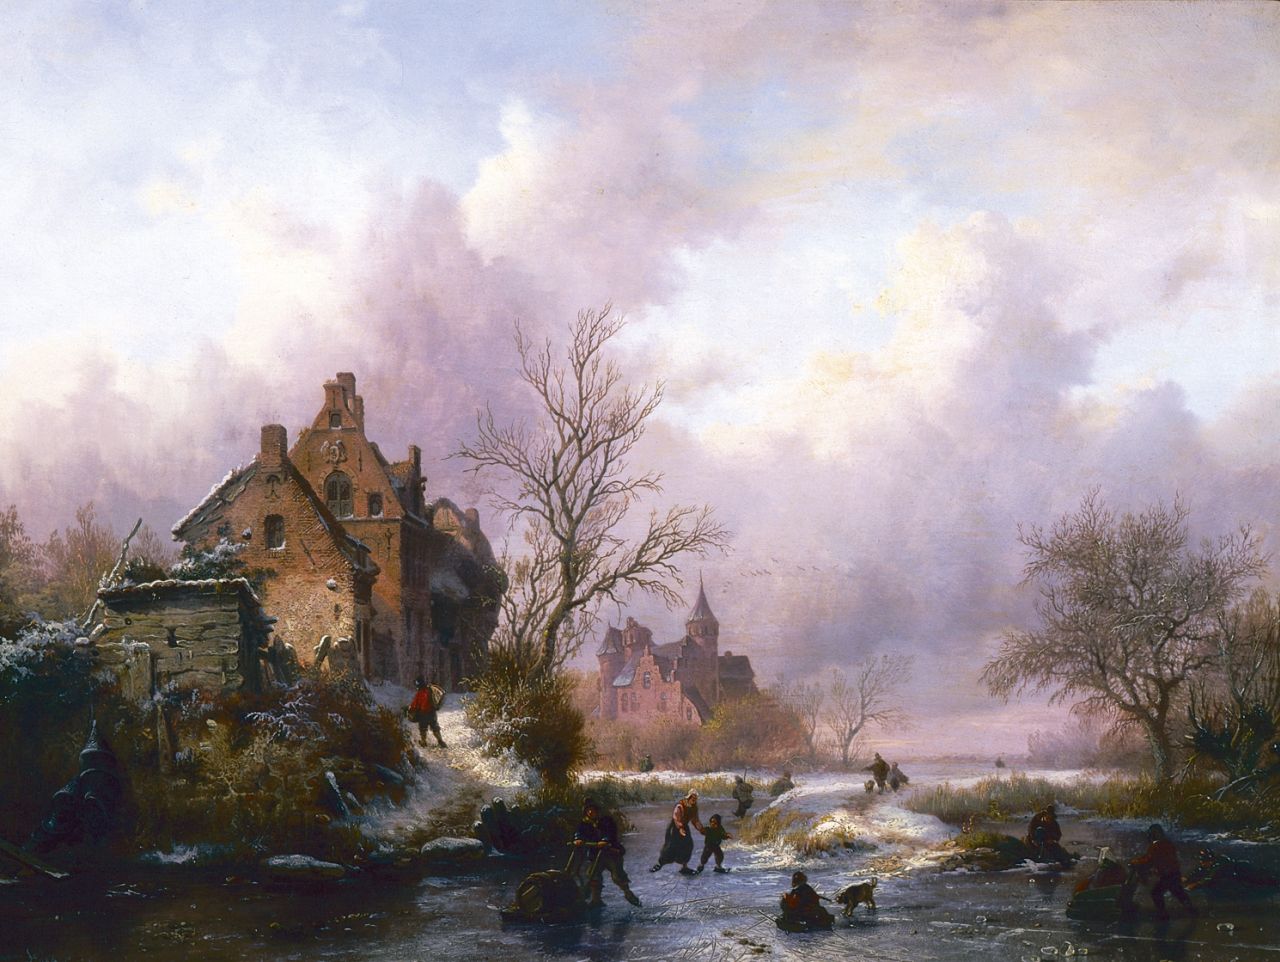 Kruseman F.M.  | Frederik Marinus Kruseman, A winter landscape with skaters on the ice, oil on panel 28.7 x 38.7 cm, signed l.l. and dated 1854